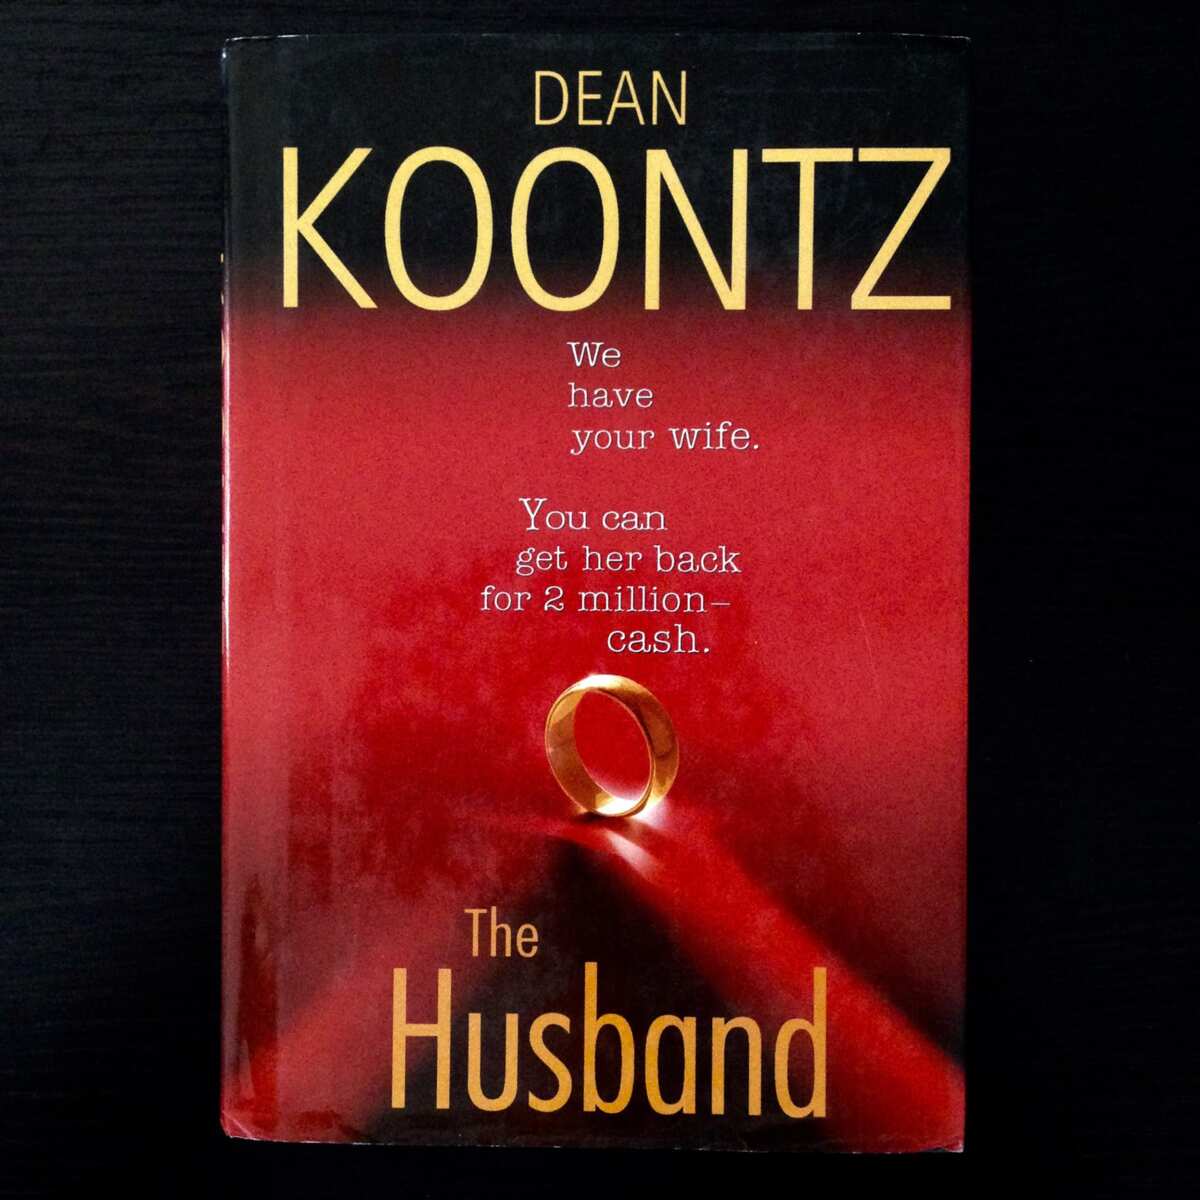 the lost soul of the city dean koontz